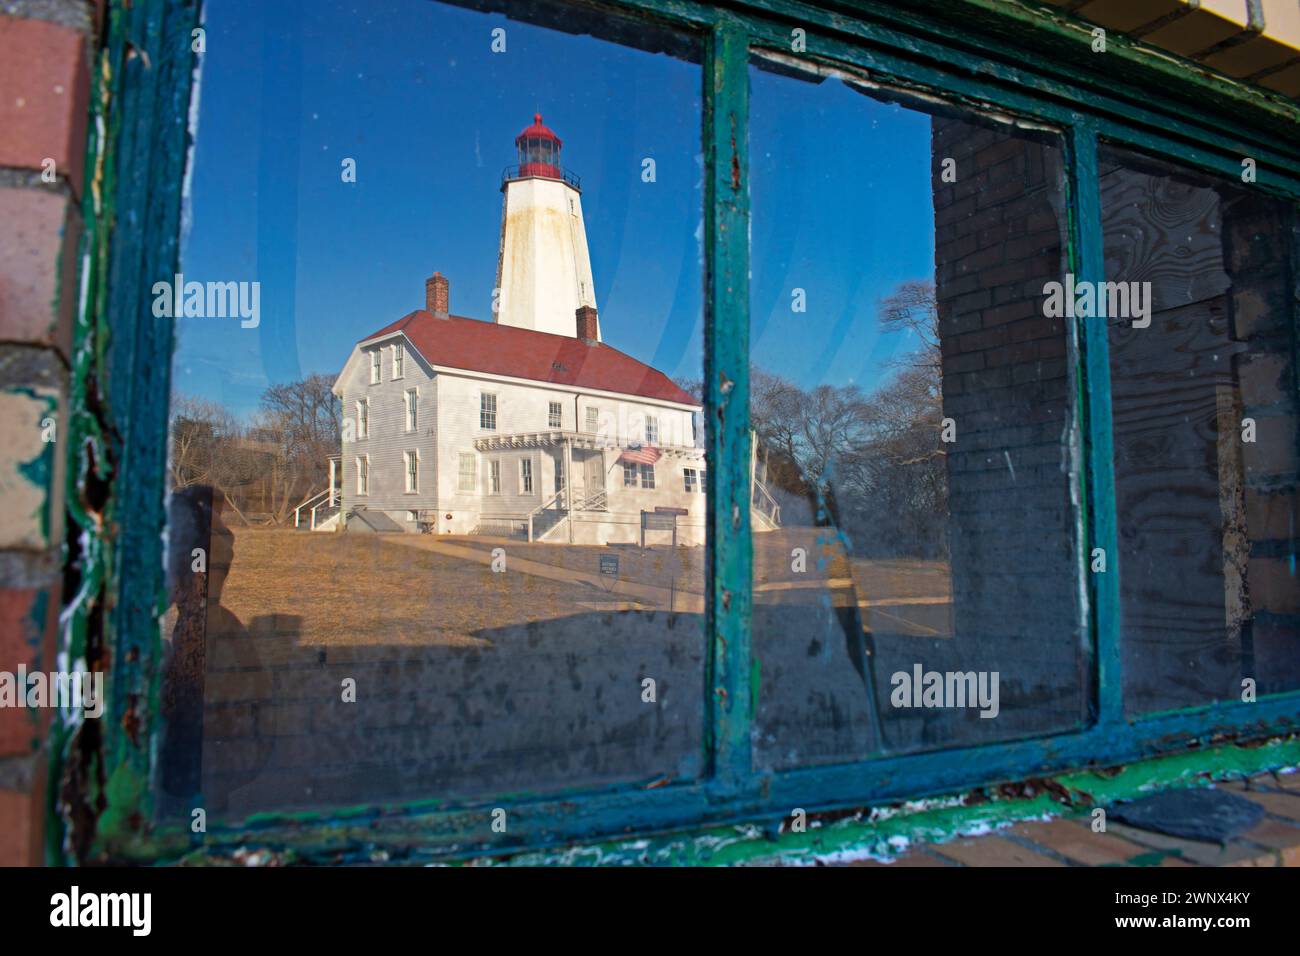 The Sandy Hook Lighthouse reflected on the partially cracked window pane of a Fort Hancock structure -91 Stock Photo